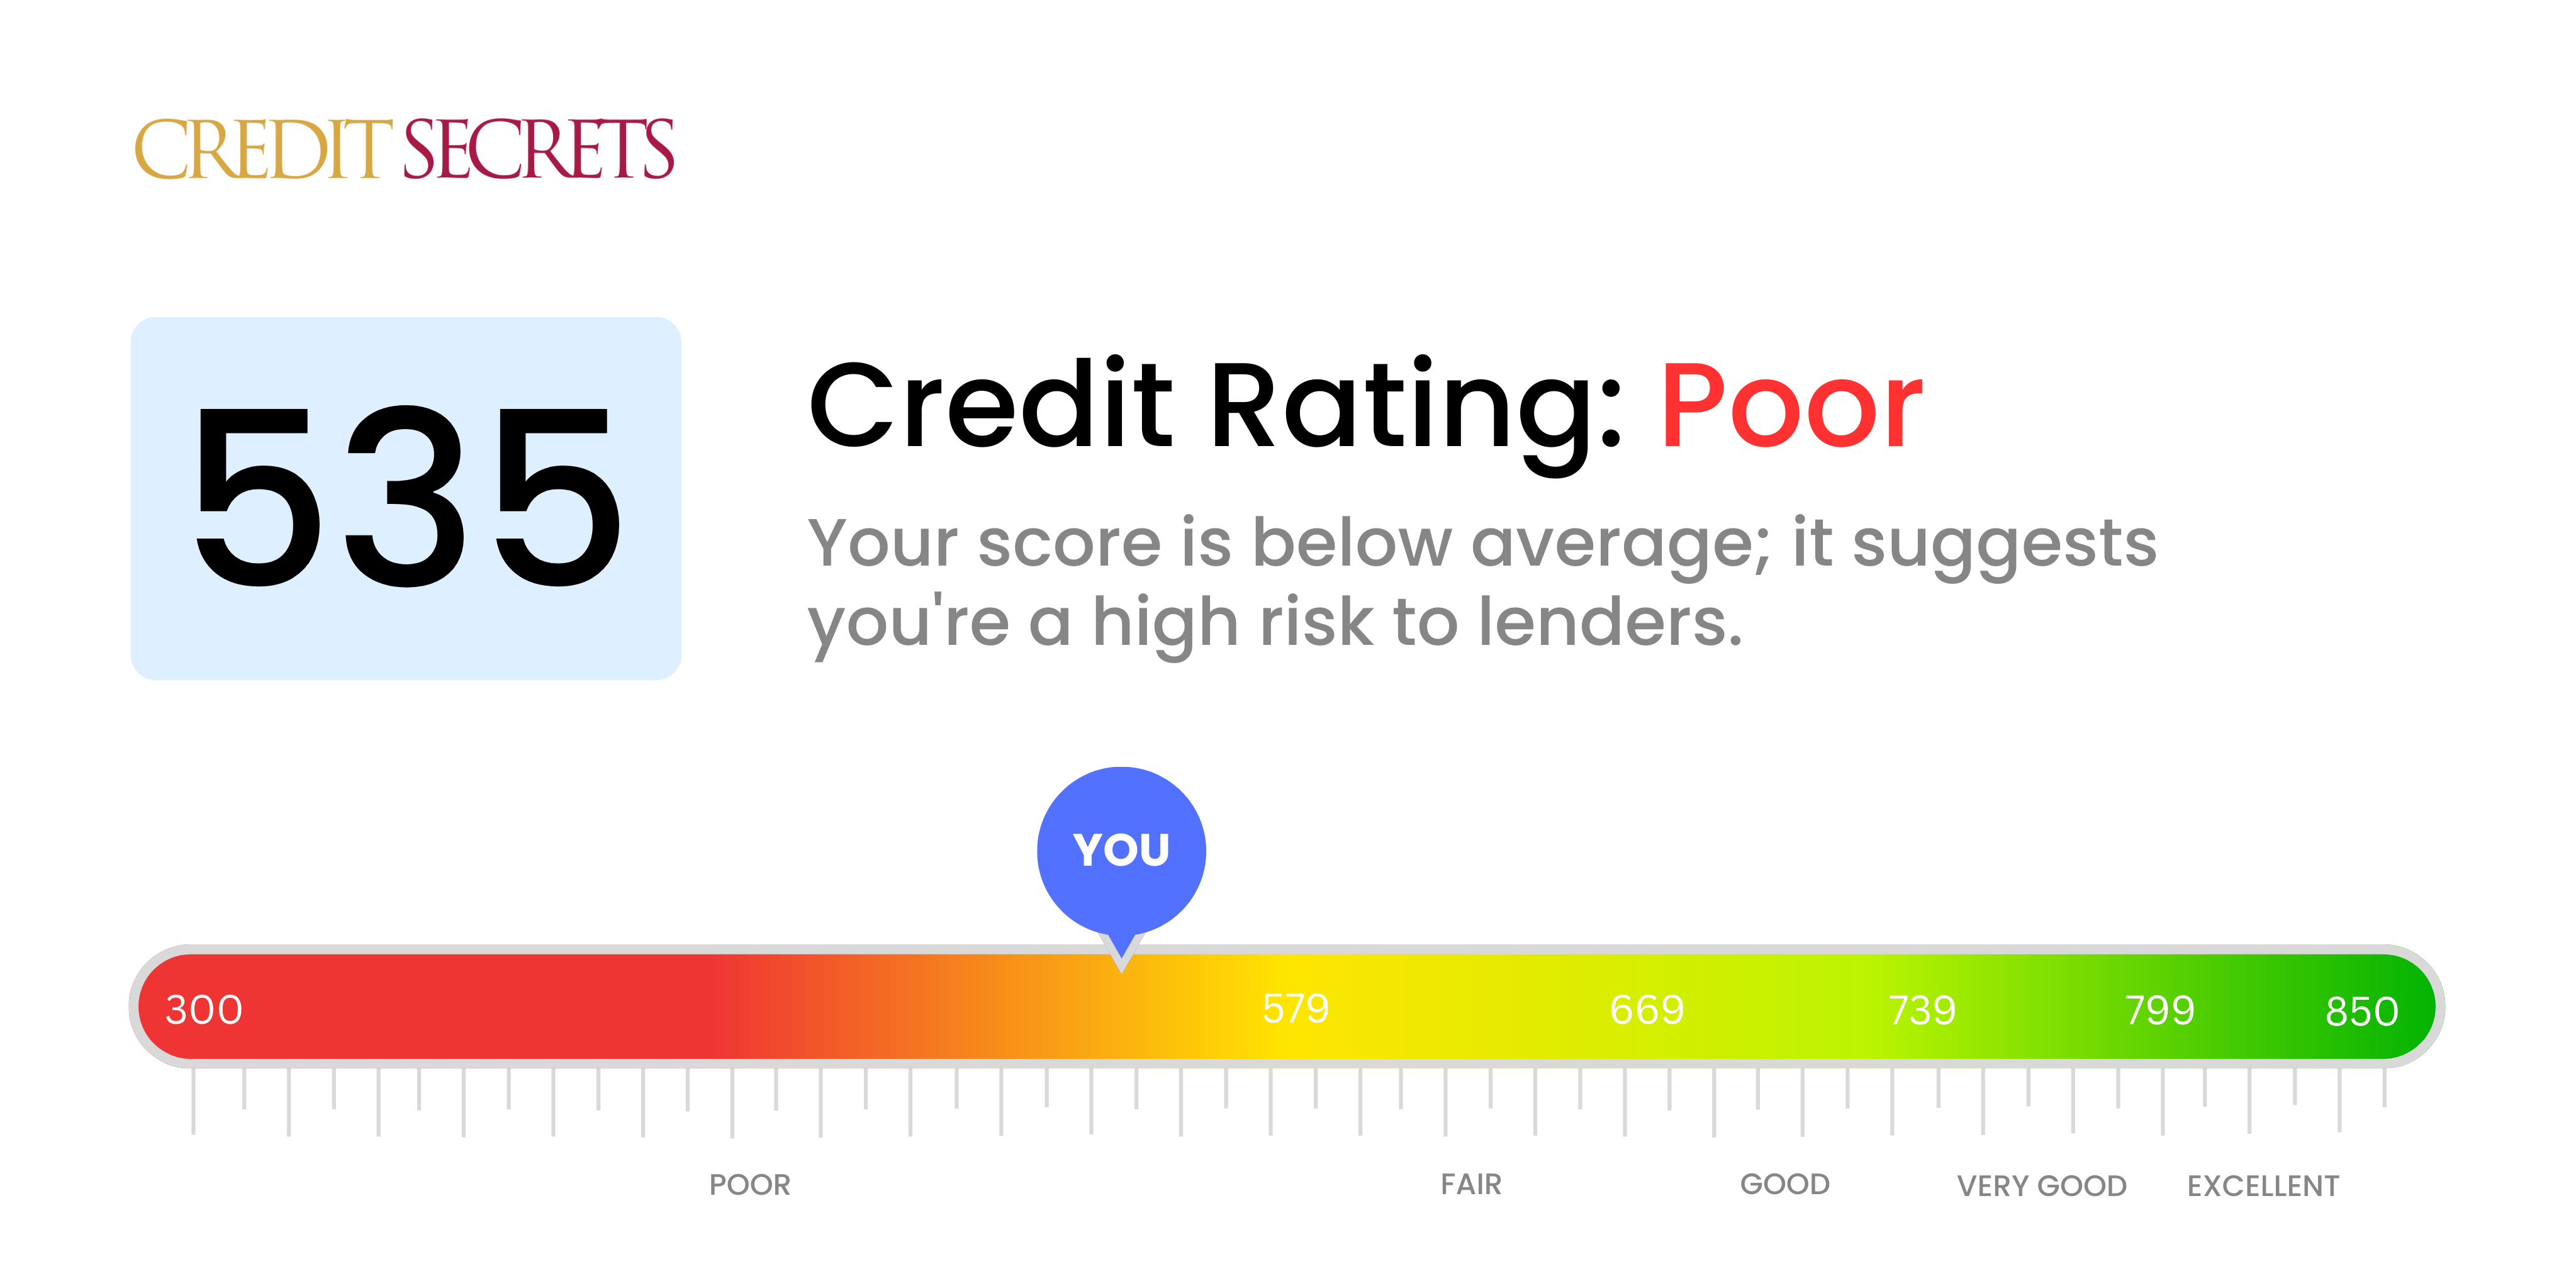 Is 535 a good credit score?